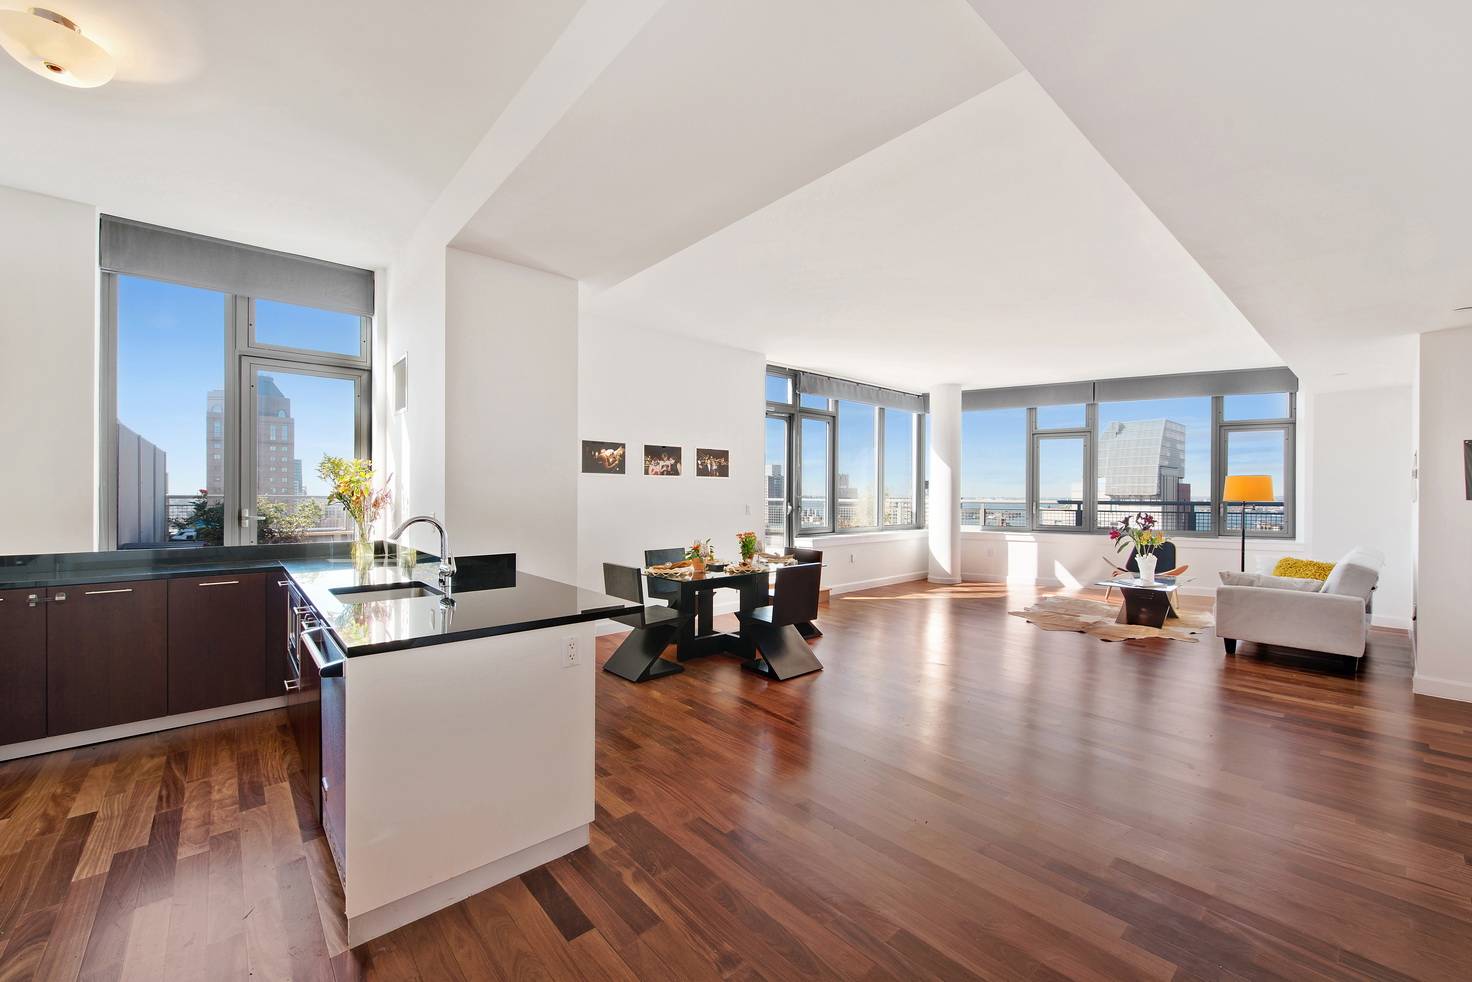 TROPHY COMBO IN DUMBO! BACK TO BACK WRAP TERRACES! PANORAMIC VIEWS! SIDE BY SIDE THREE BED BEAUTIES ON THE MARKET TOGETHER! 